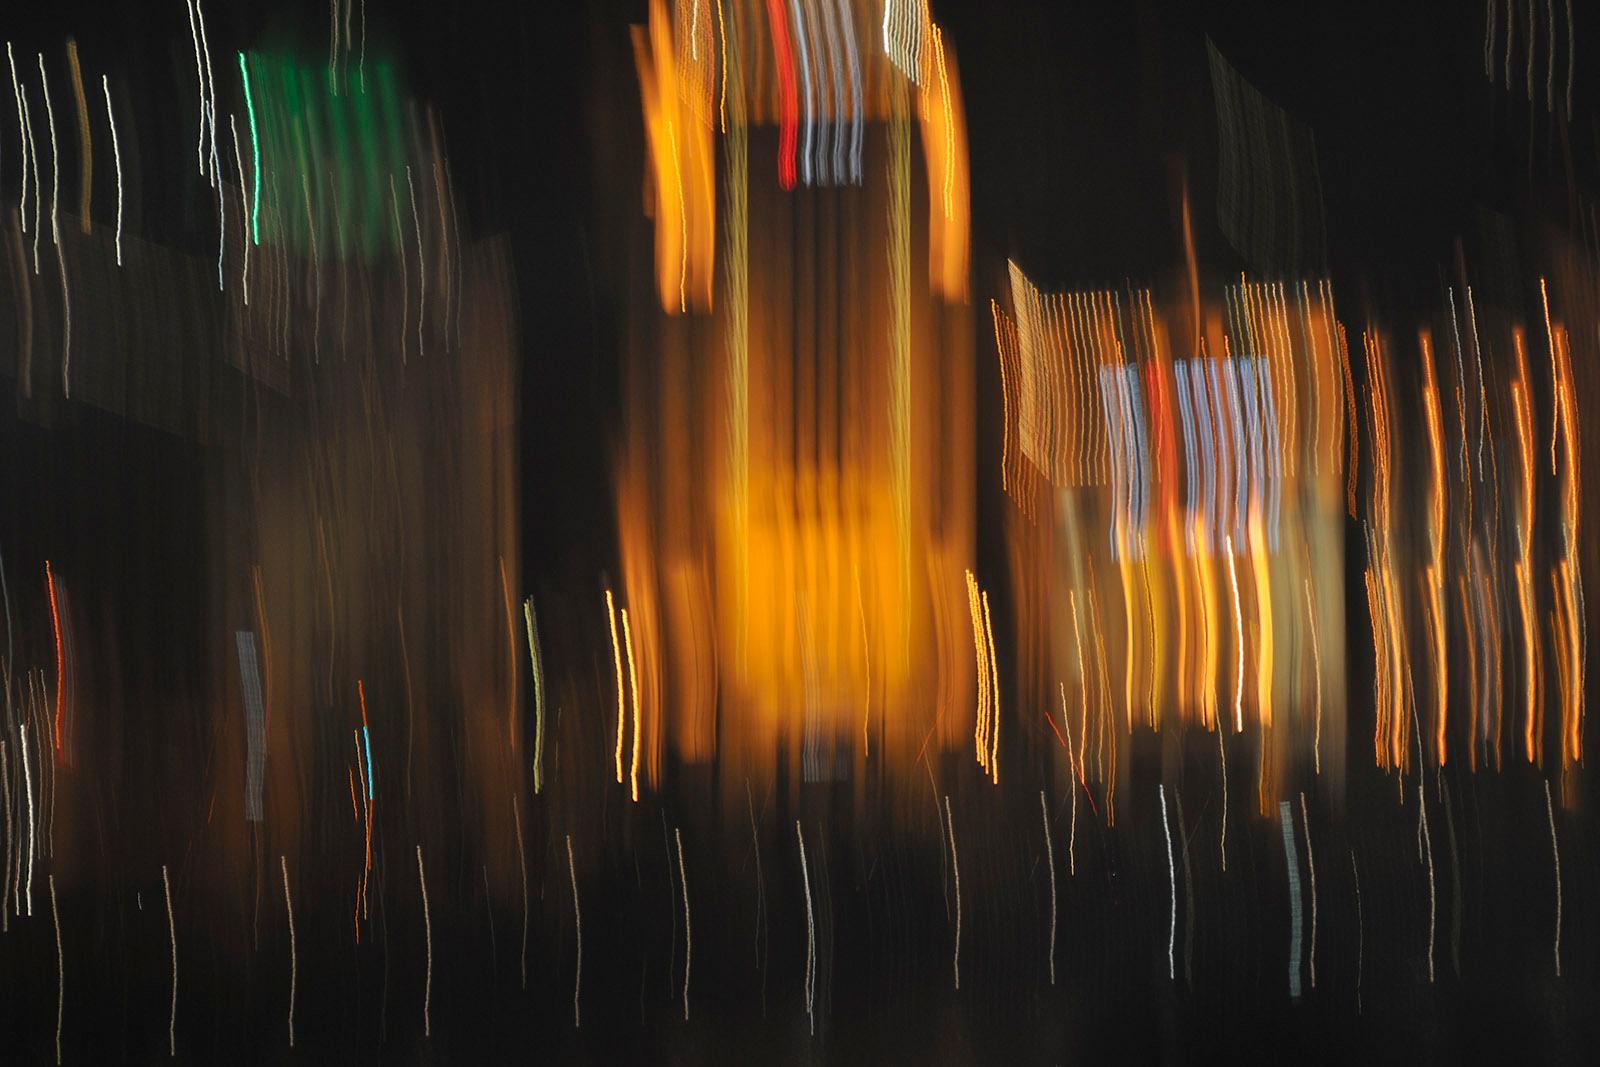 Michael Banks Abstract Photograph - Future city 2 - Signed limited edition abstract fine art print, contemporary